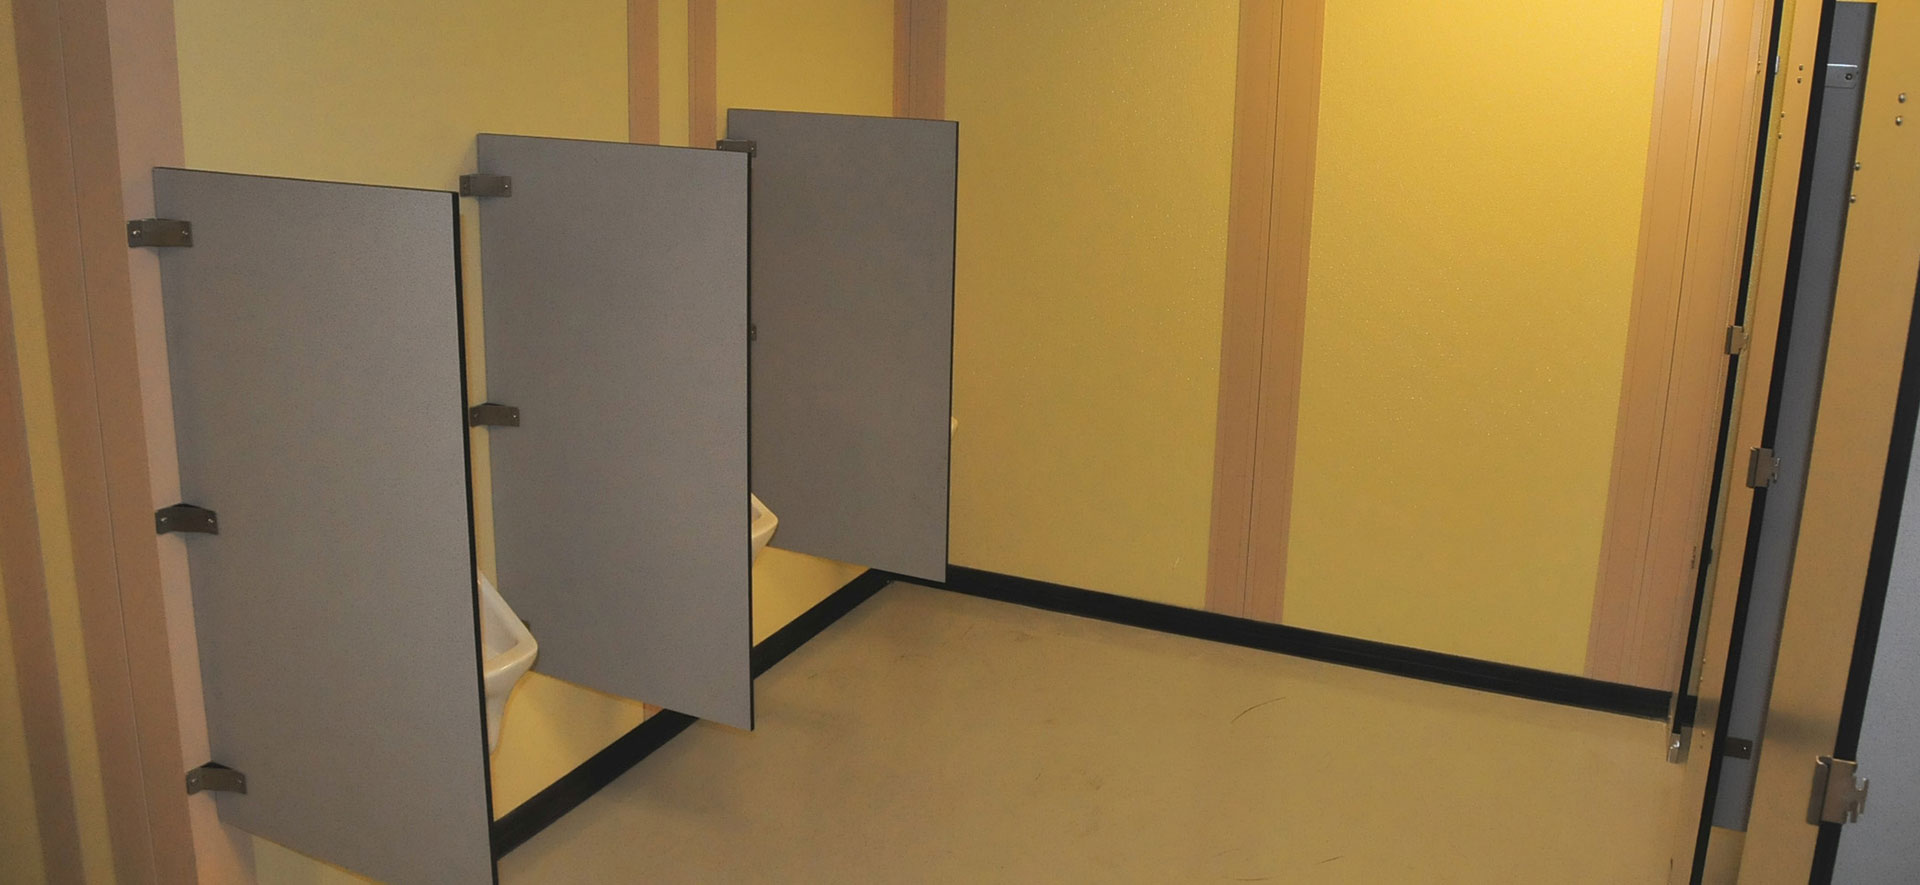 toilet partitions in noida